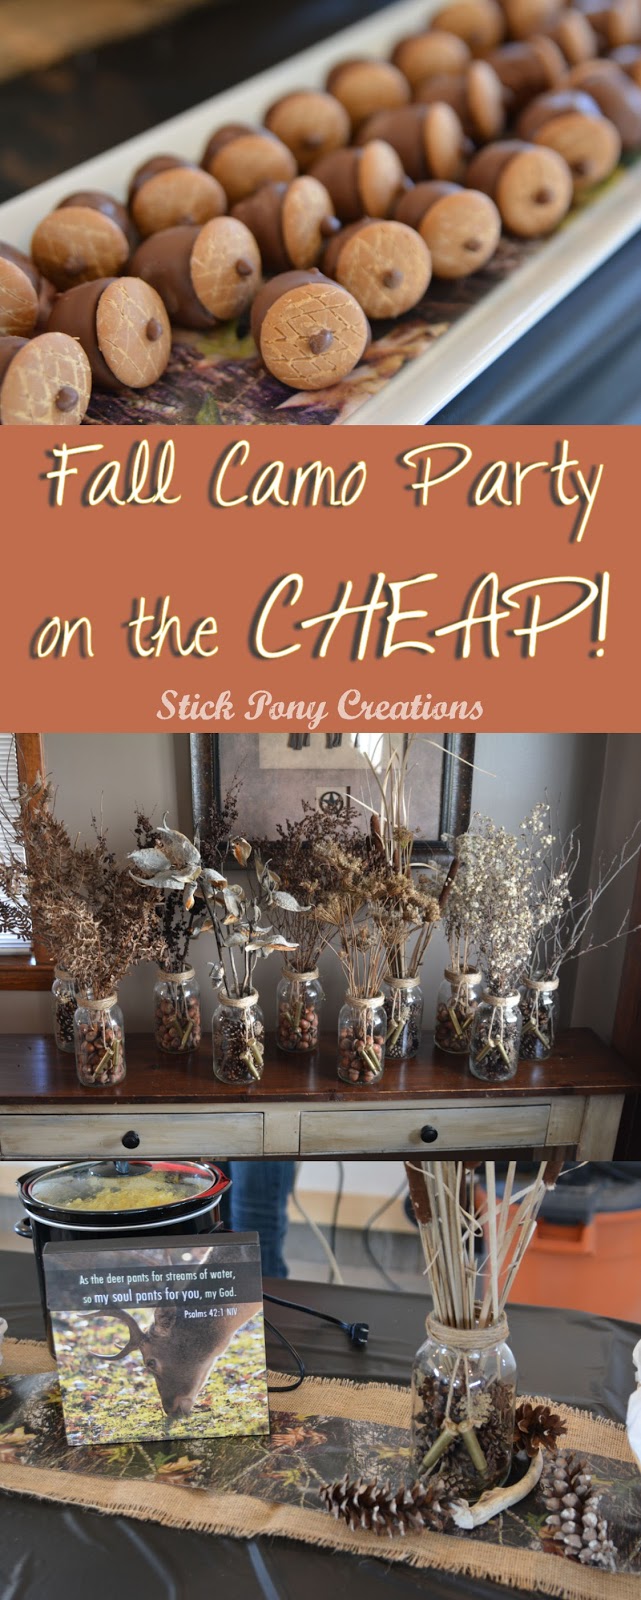 Stick Pony Creations Fall Camo Party On The CHEAP